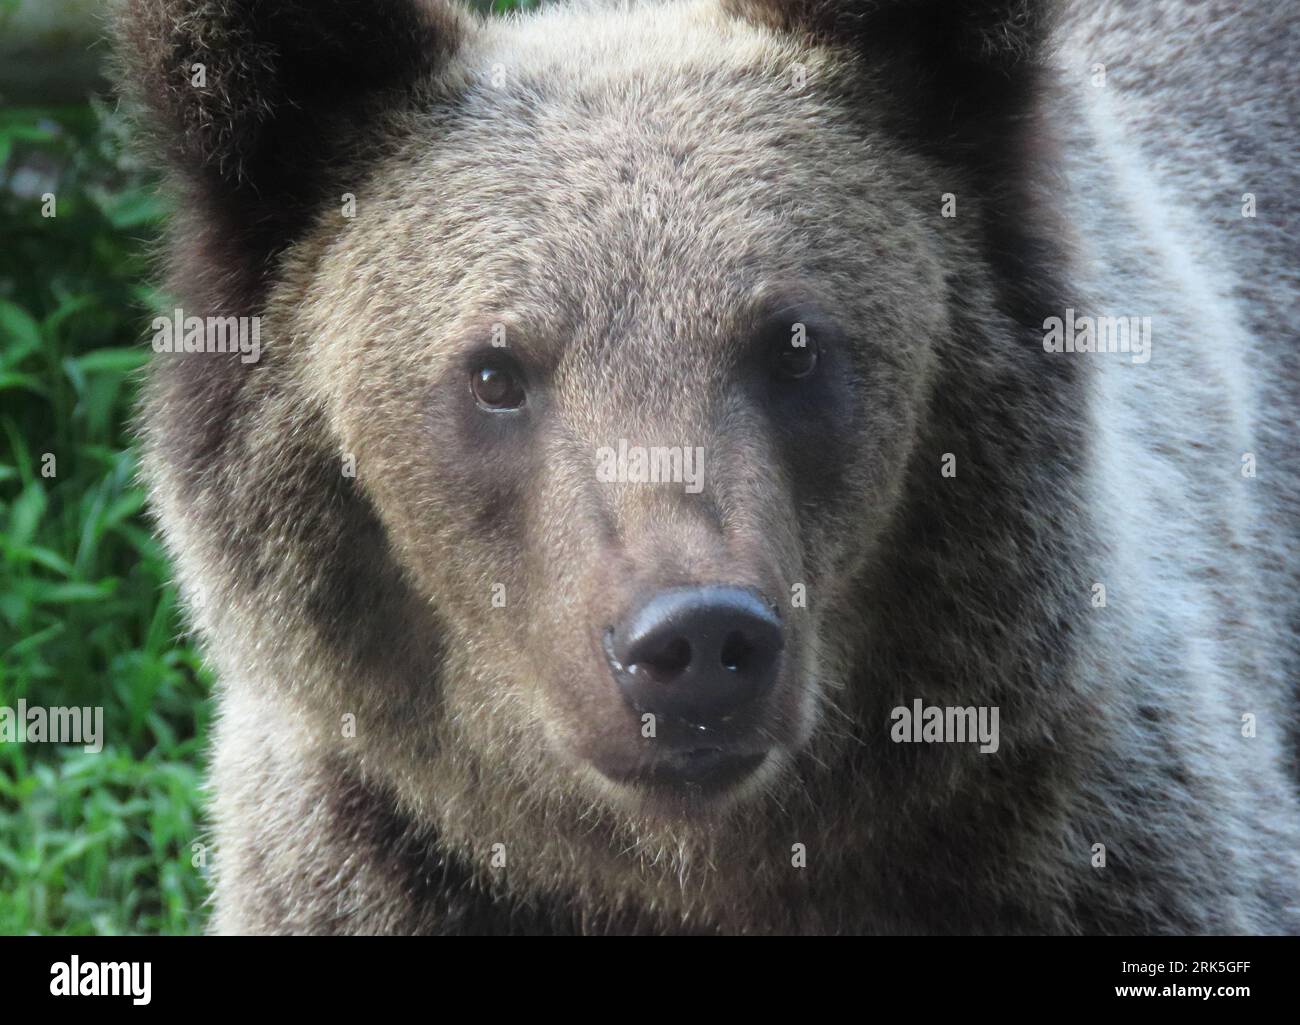 A closeup of a grizzly bear with a fierce expression. Stock Photo